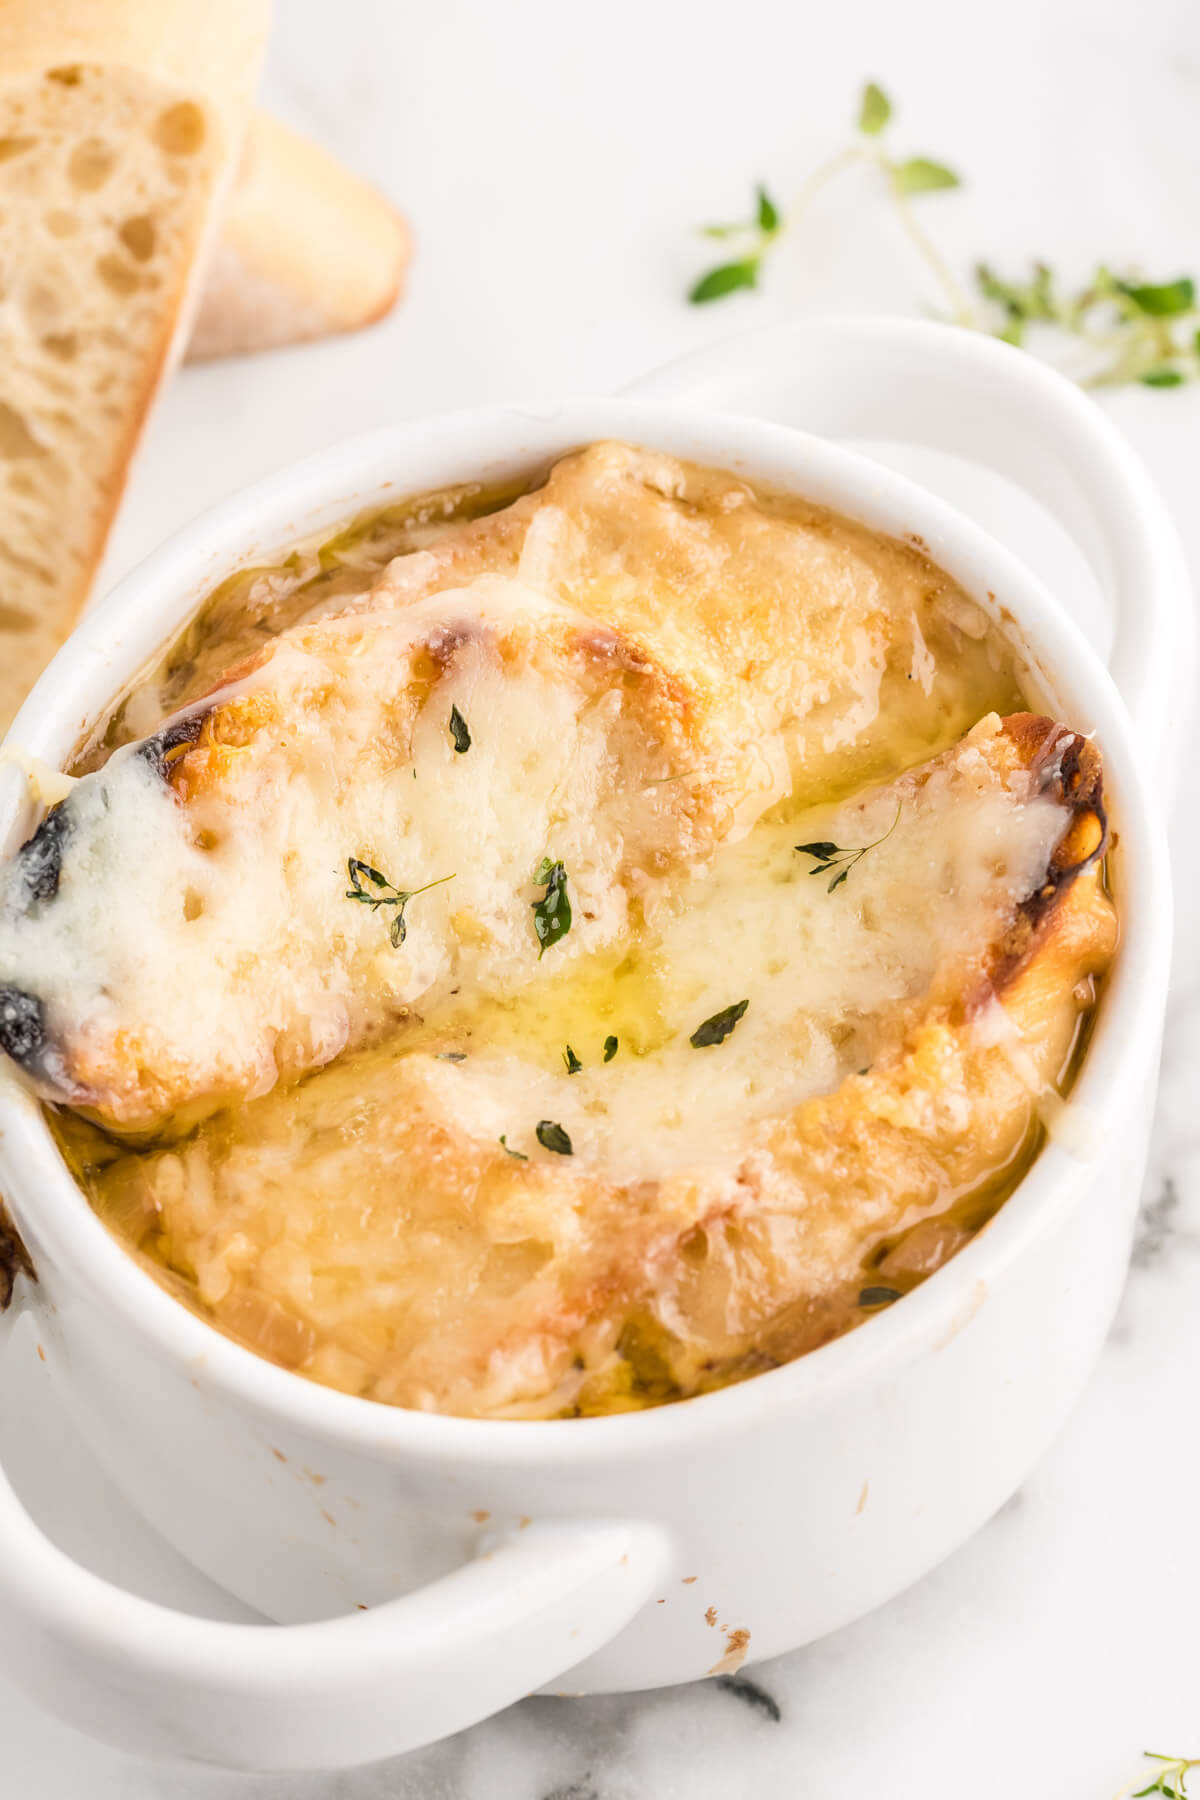 French onion soup with cheesy croutons on top.